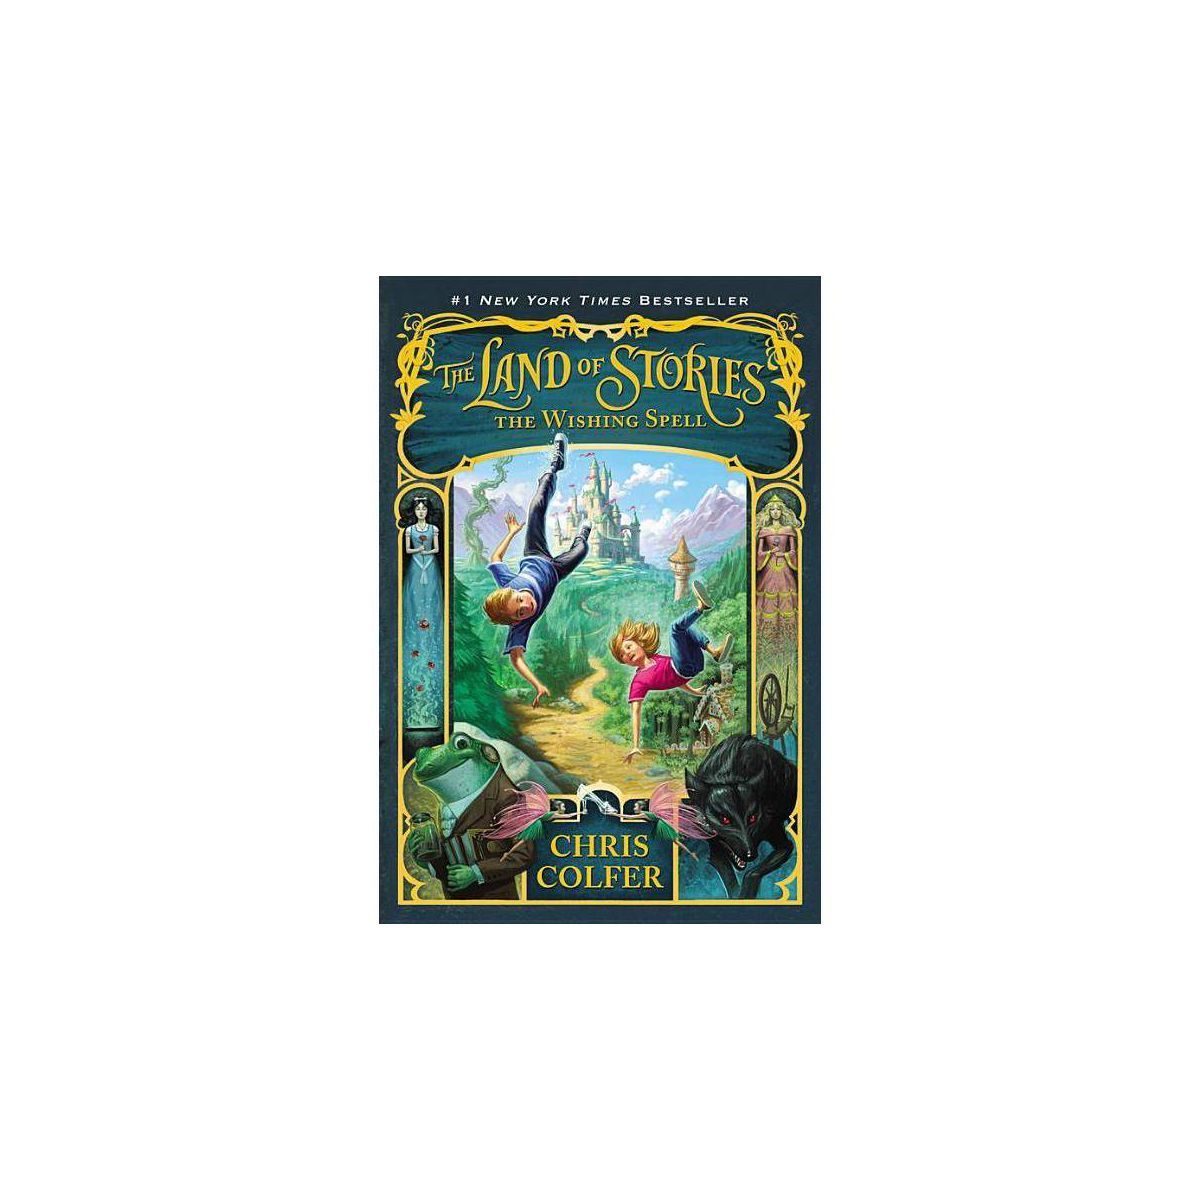 The Land of Stories: the Wishing Spell ( Land of Stories) (Paperback) - by Chris Colfer | Target